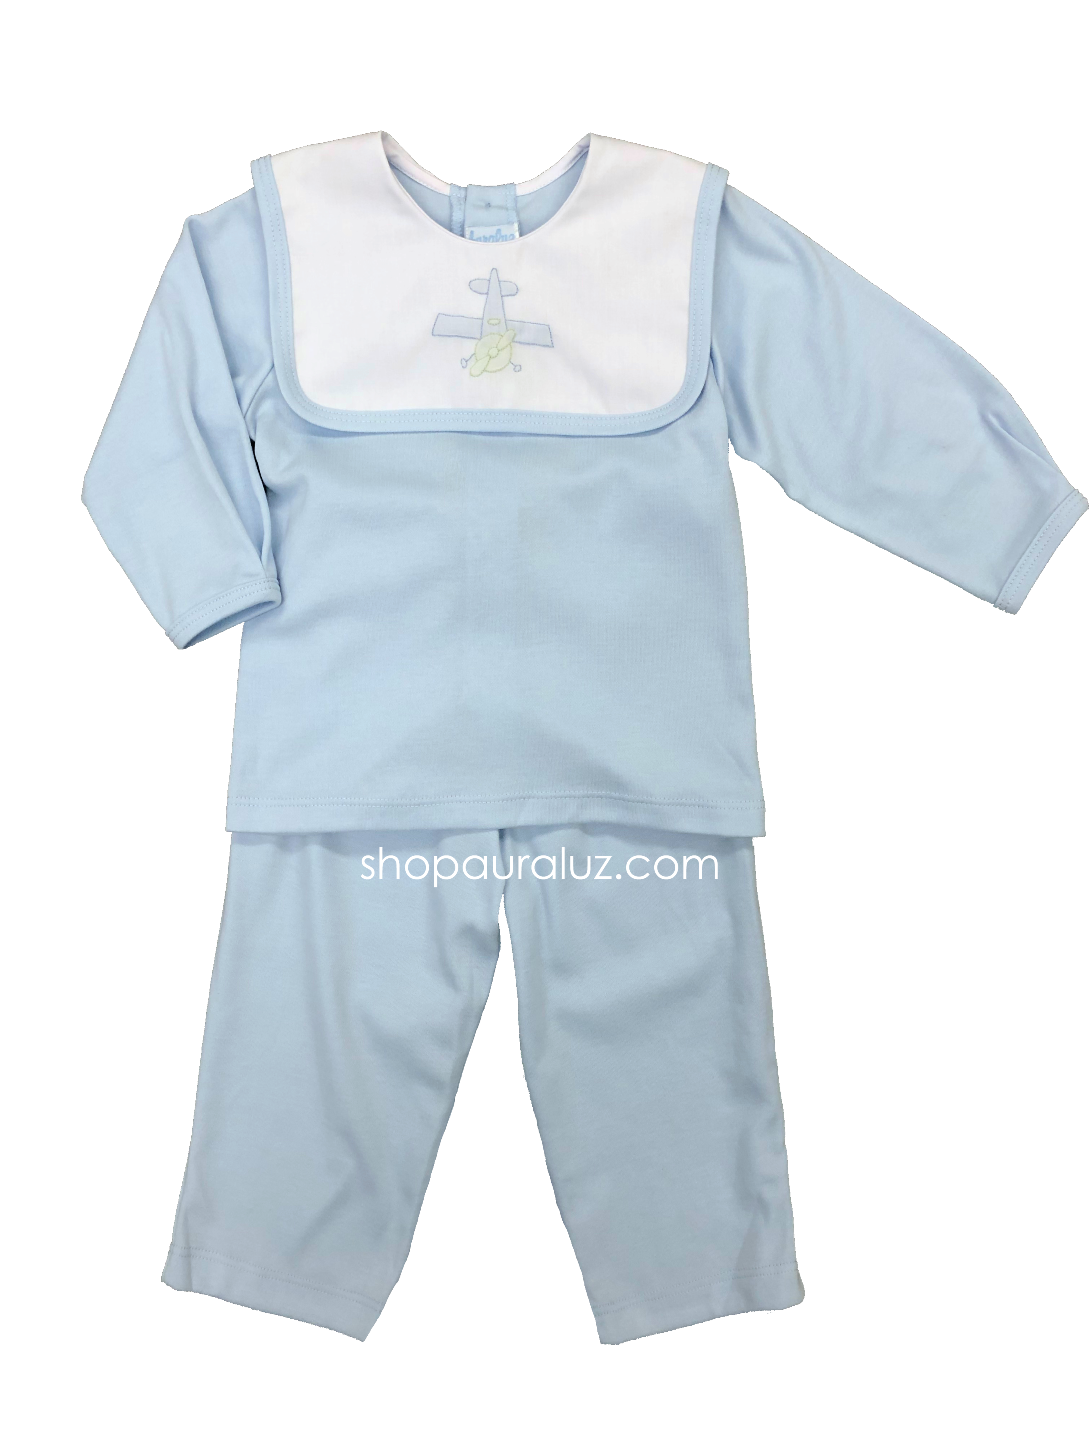 Auraluz Knit Boy 2pc...Blue with white square collar and embroidered airplane